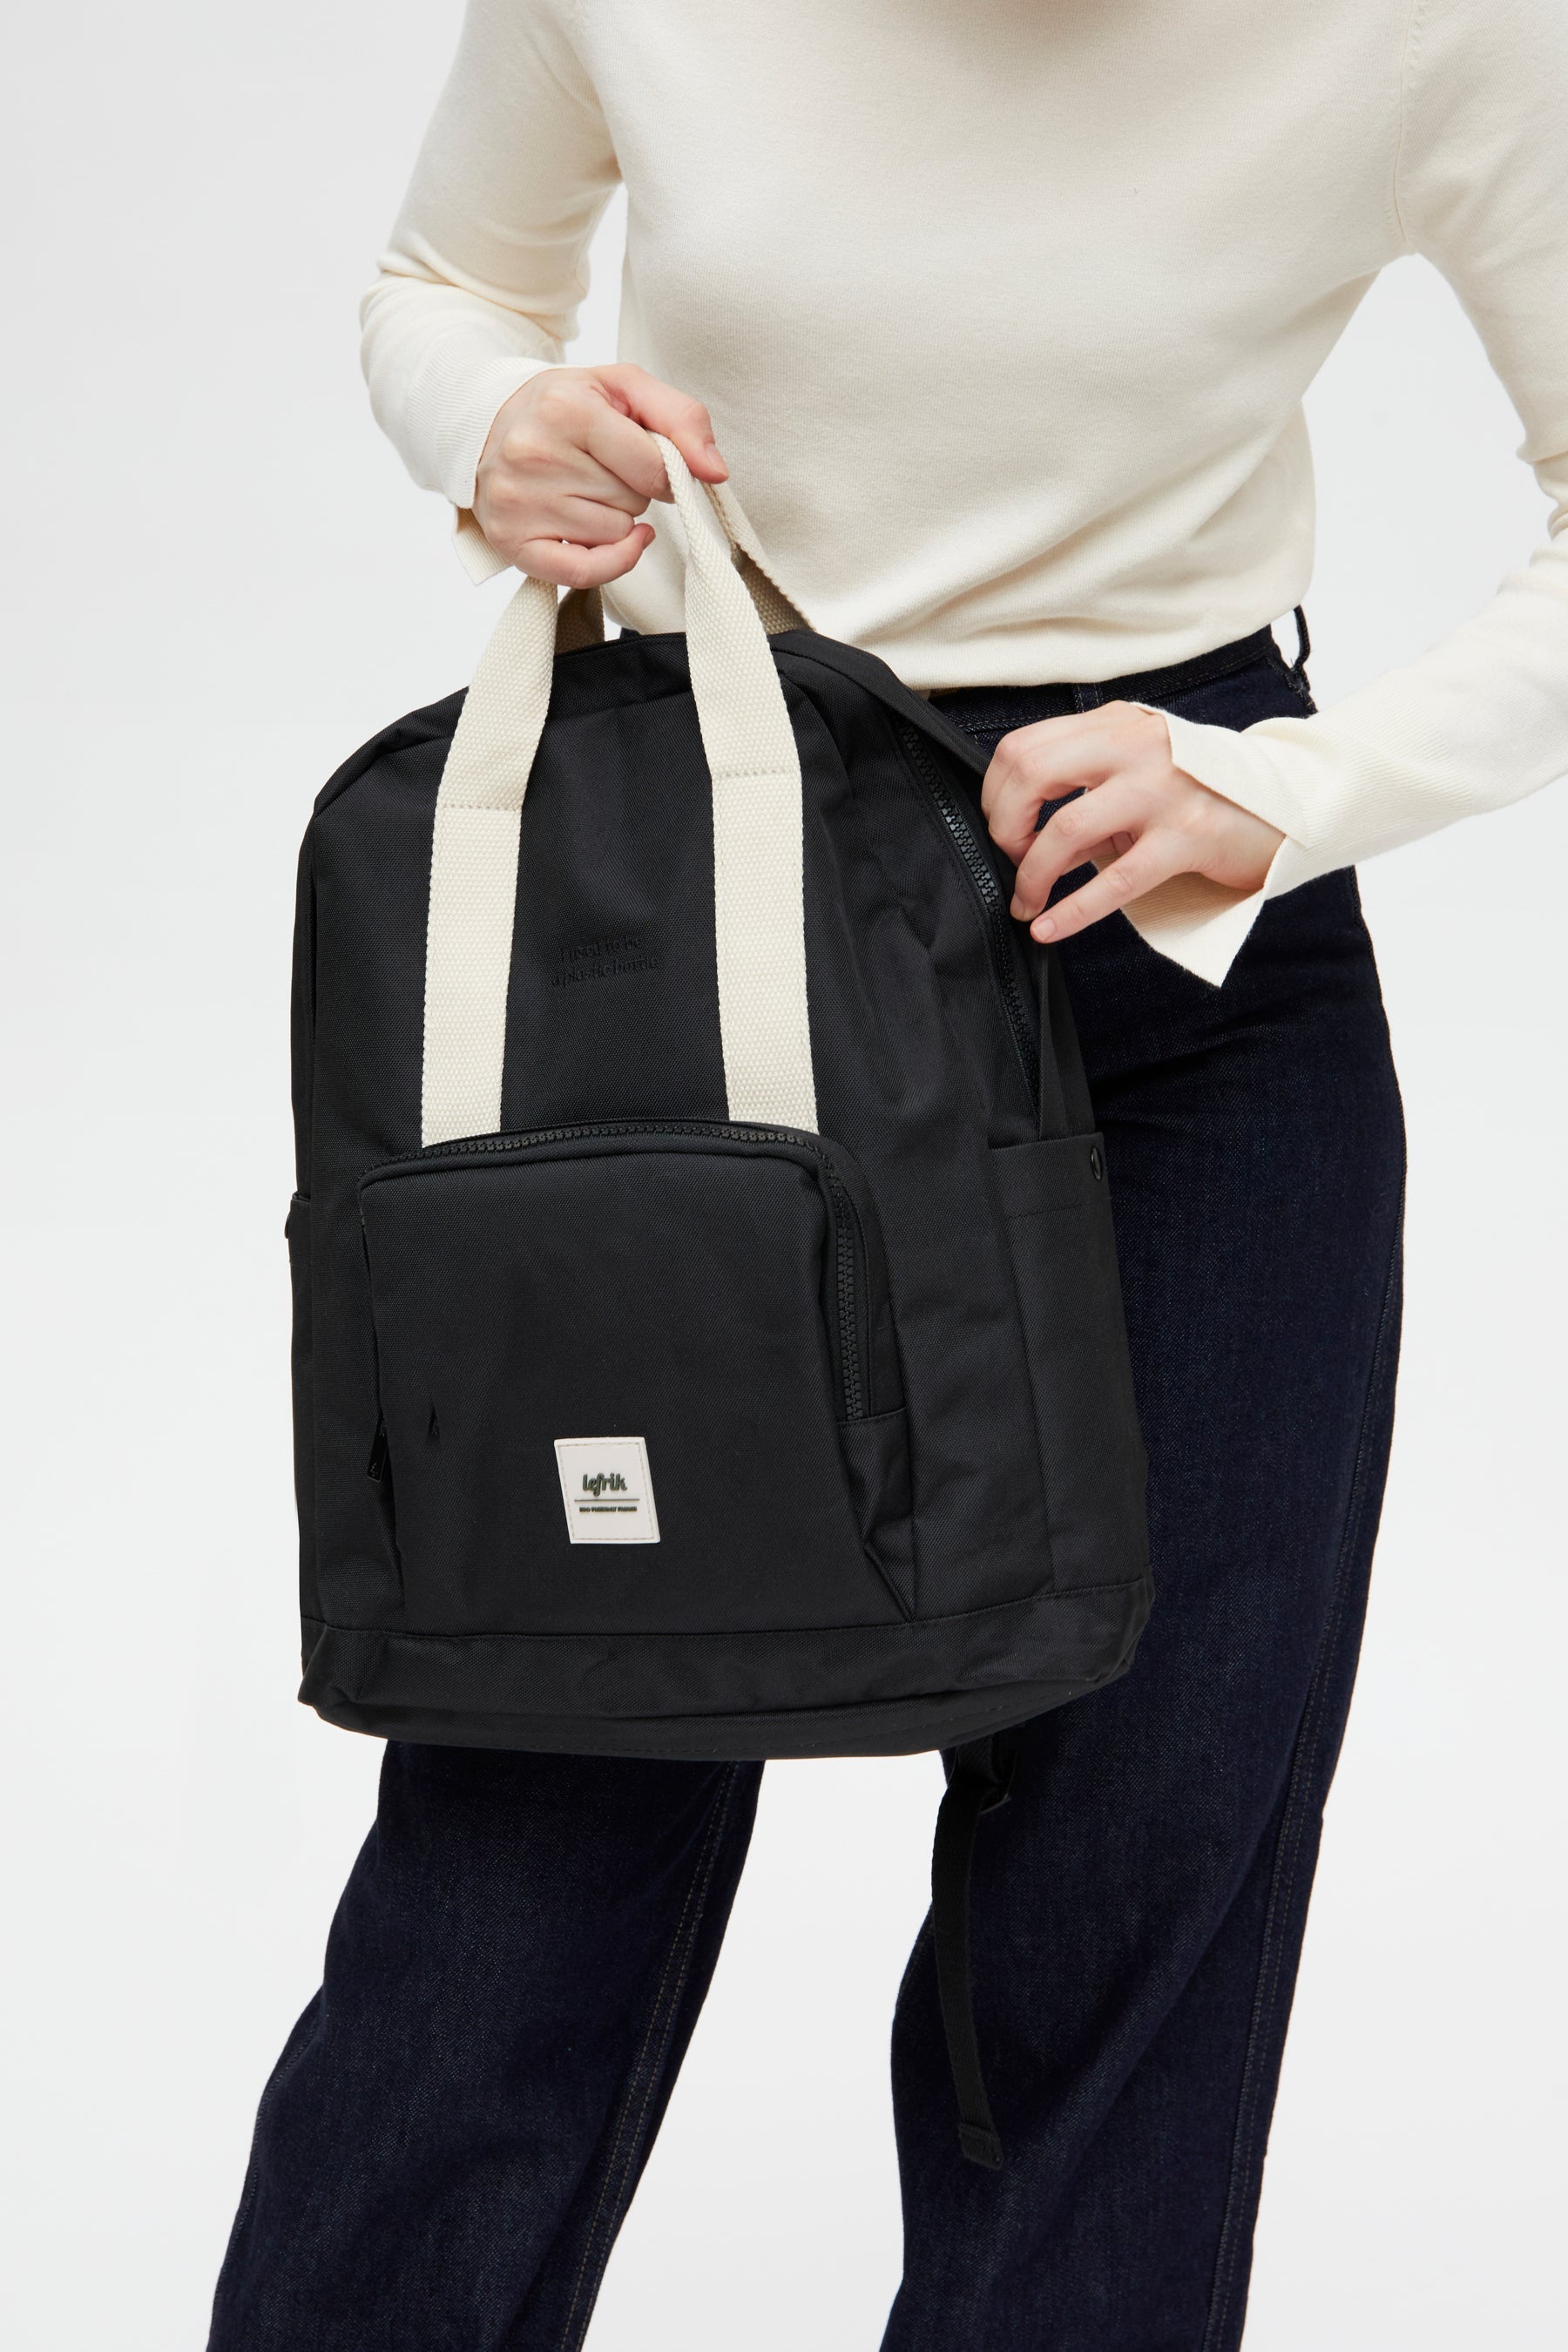 Black backpack Capsule (15l) made from recycled PET plastic bottles